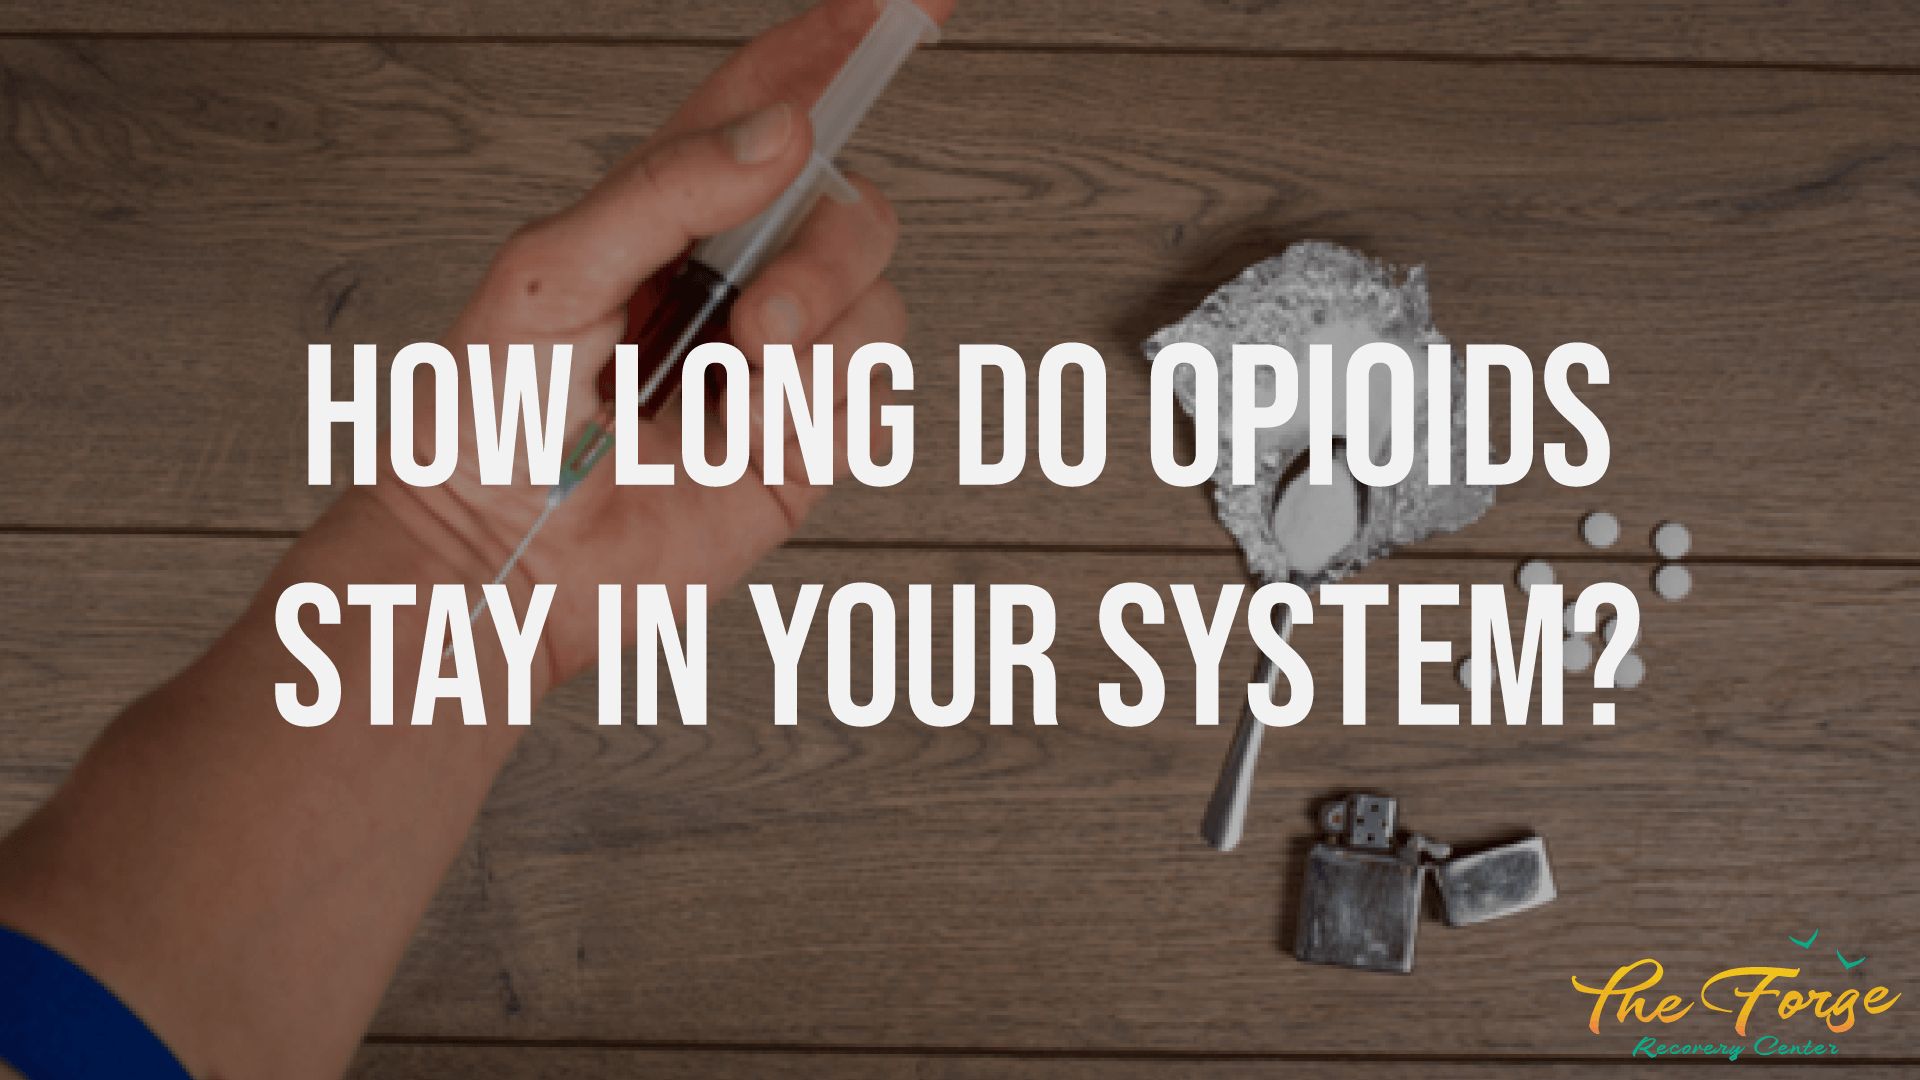 Opioids: Discover How Long Opioids Stay in Your System